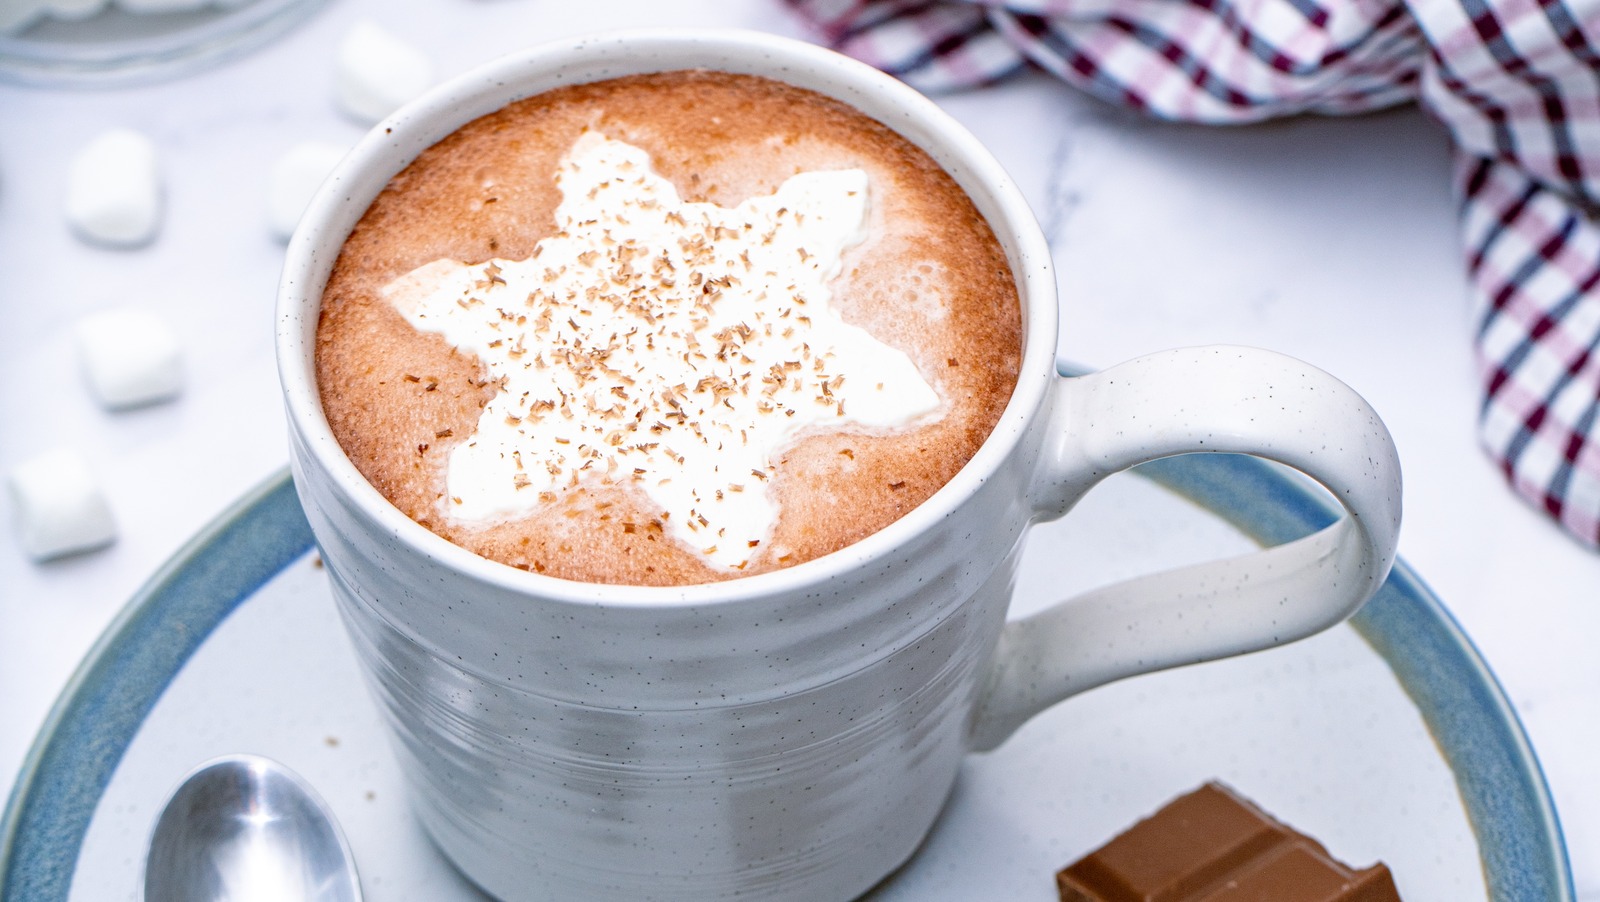 https://www.tastingtable.com/img/gallery/the-cookie-cutter-tip-for-festive-whipped-cream-on-your-hot-chocolate/l-intro-1698454581.jpg